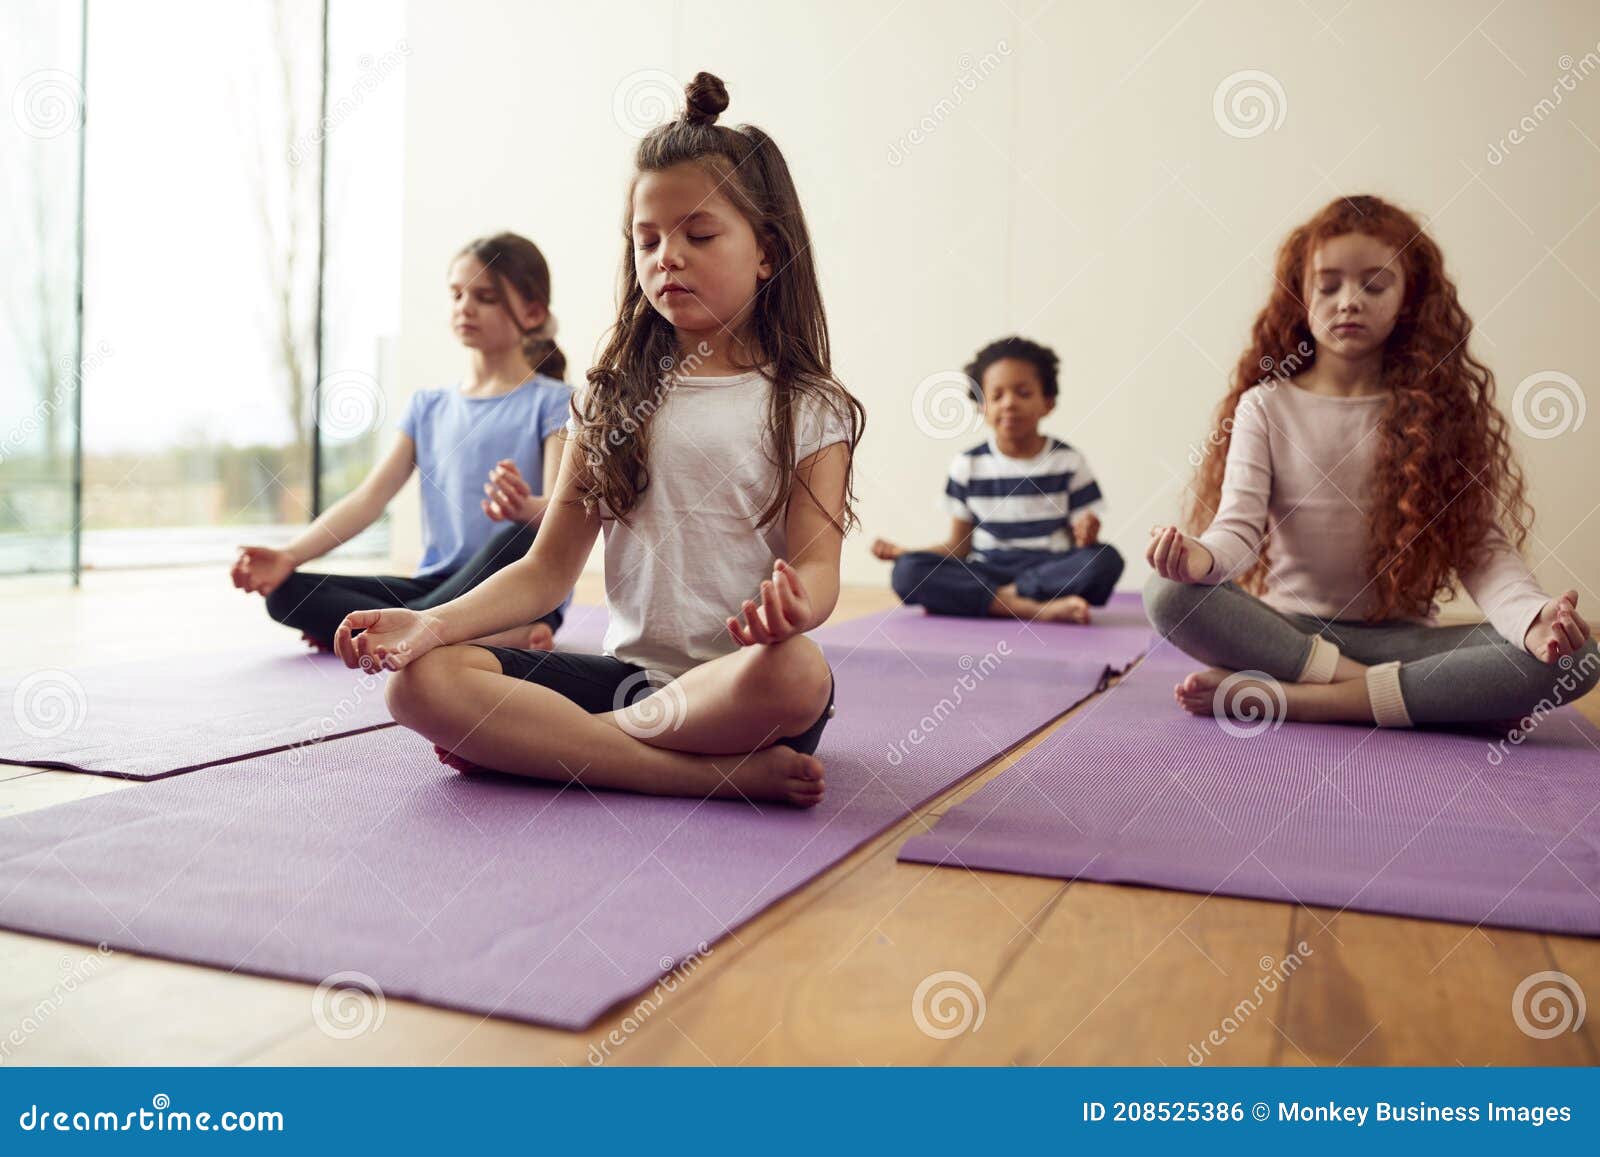 group of children sitting on exercise mats and meditating in yoga studio